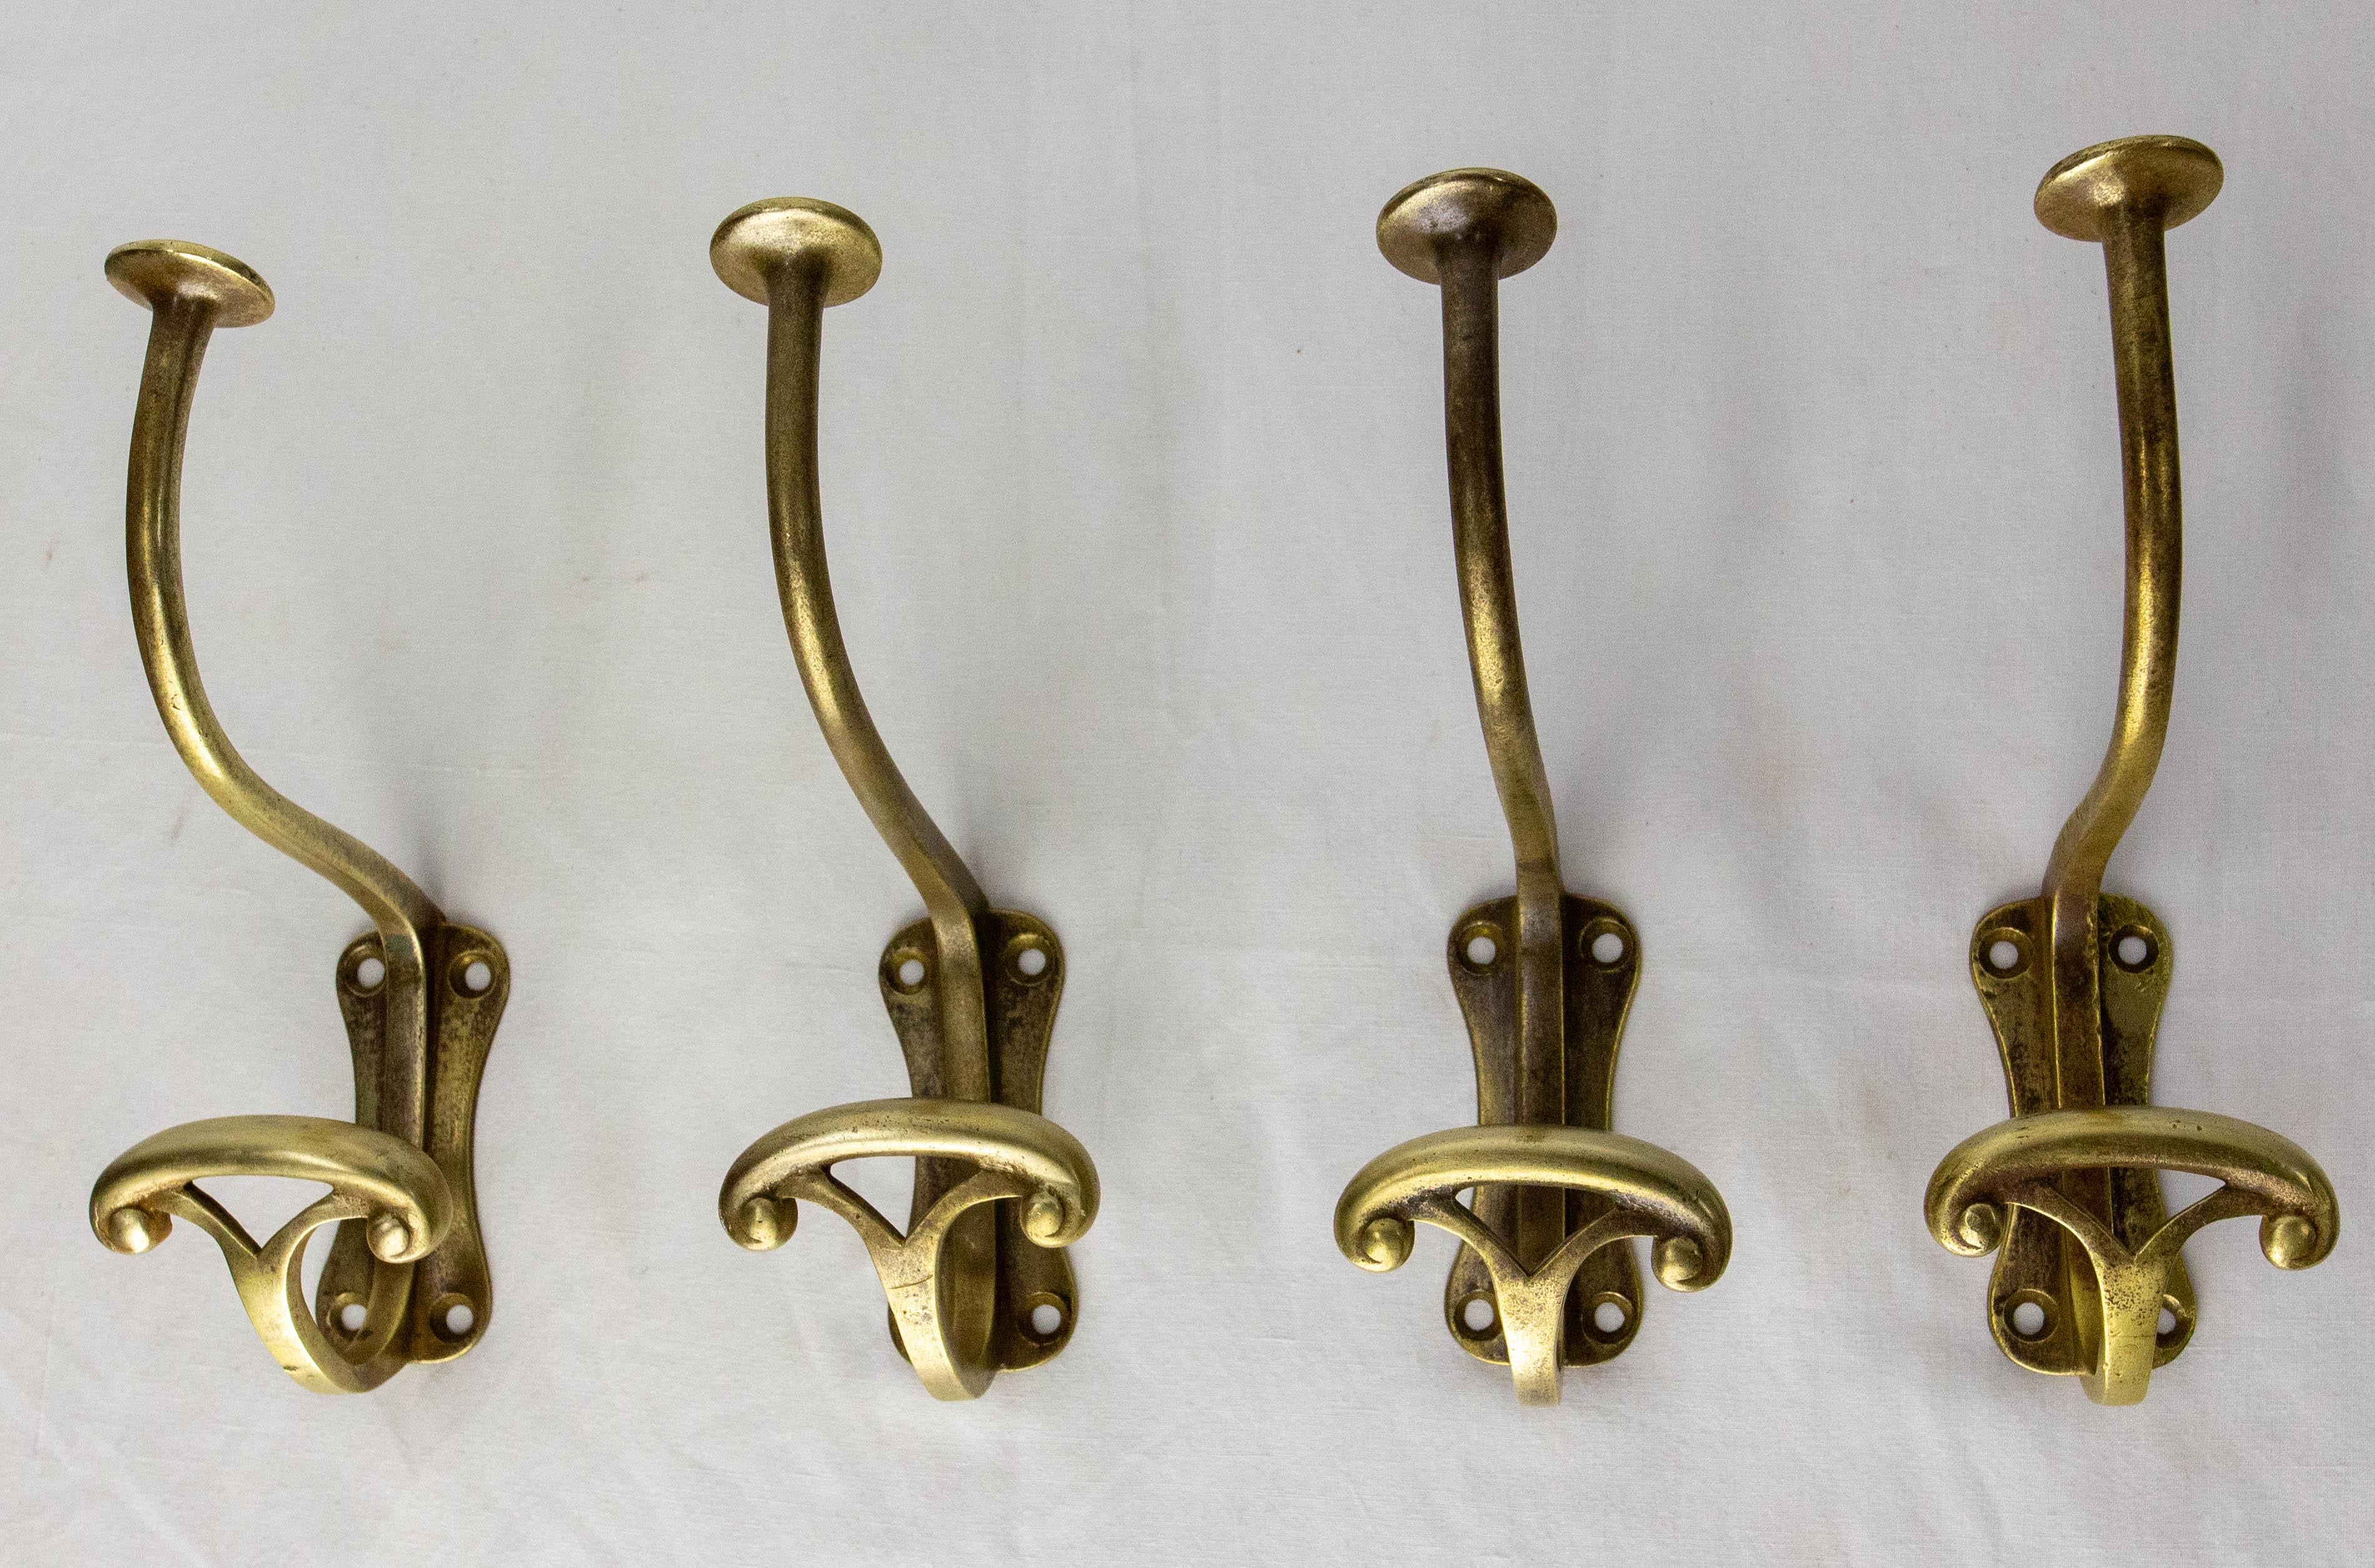 French antique bronze coat hooks of the period Art Nouveau.
Made in the early 20th century.

Good condition.

Shipping:
25 / 22 / 11 cm 1.4 kg

